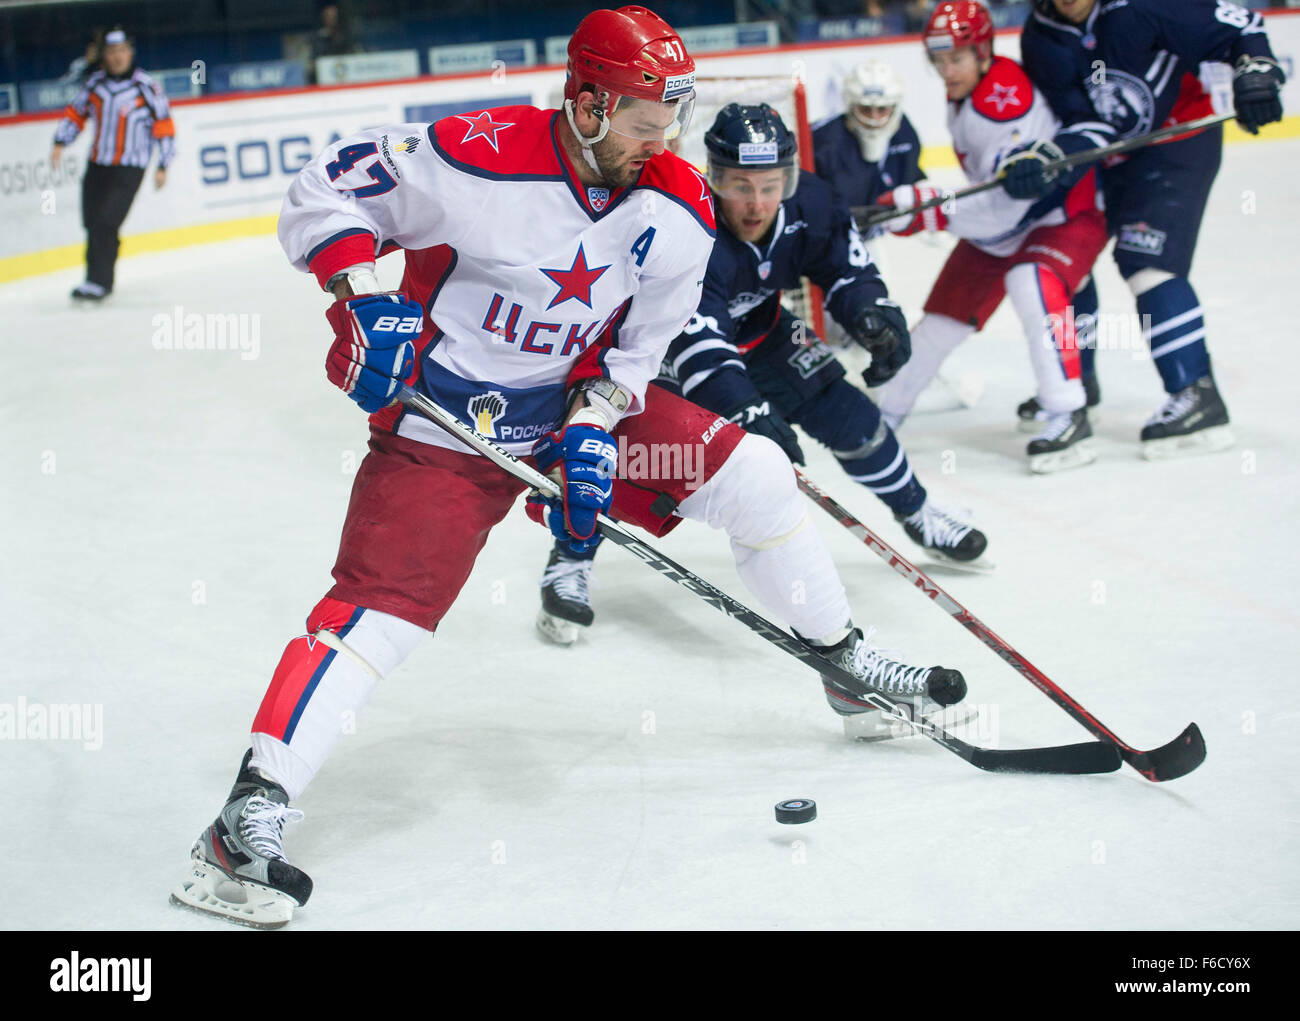 Russia's Alexander Ovechkin during the HC Lev Praha vs HC Dynamo Moscow KHL  match played in Prague, Czech Republic on Tuesday, October 9, 2012. (CTK  Photo/Katerina Sulova Stock Photo - Alamy